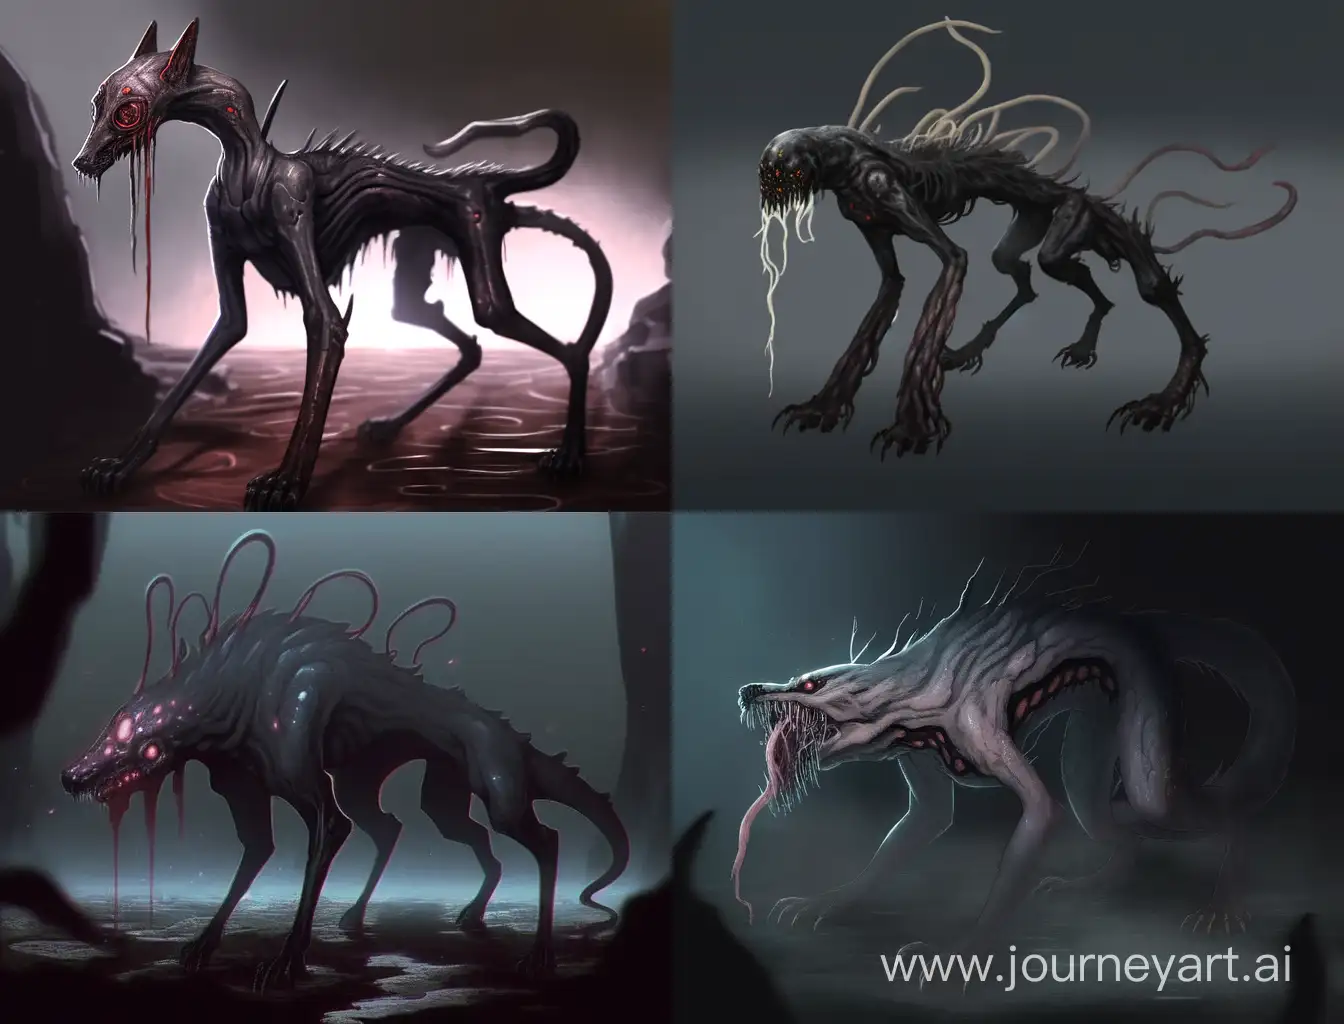 Dark-Fantasy-Art-Eyesless-Mutant-Dog-and-Slender-Creature-Encounter-in-Kaijuinfested-Realm